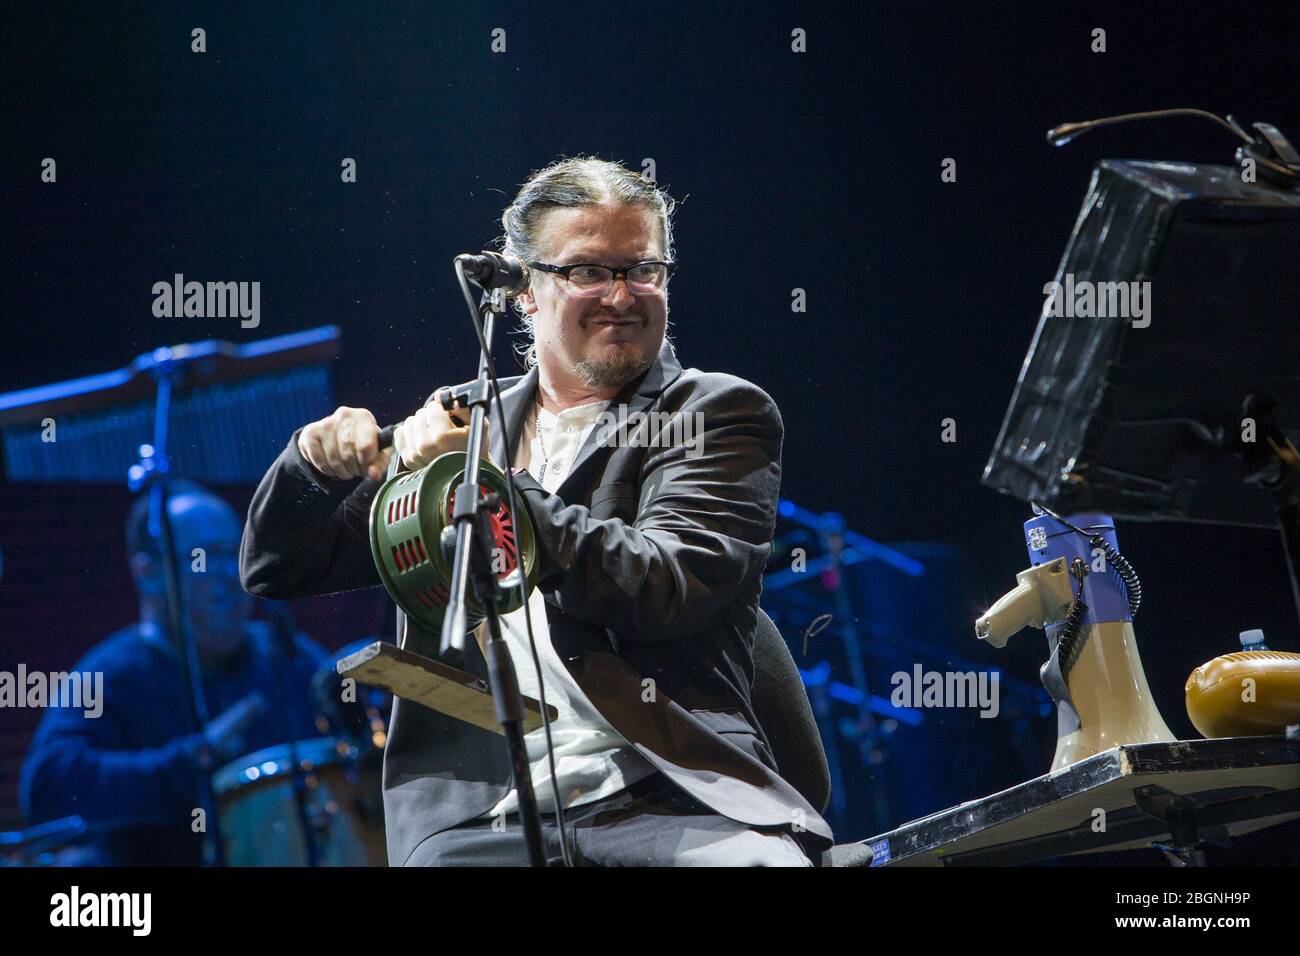 mike patton during Mike Patton - Mondo Cane, Music Concert in prato (po),  Italy, August 31 2019 Stock Photo - Alamy